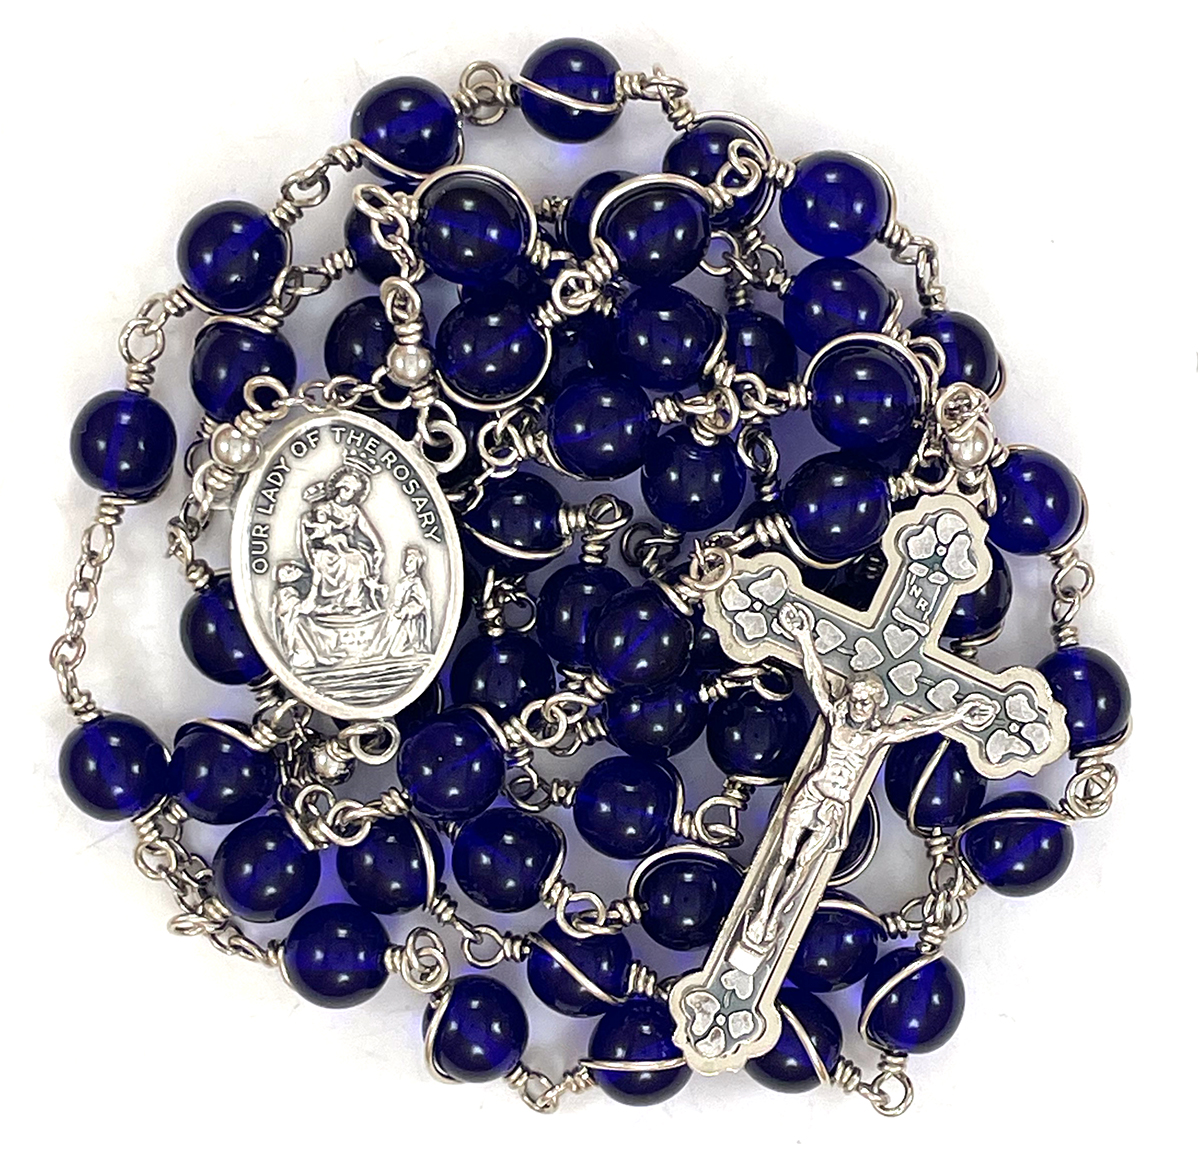 Blue Cage-Wrapped Rosary ($47.99 CAD)